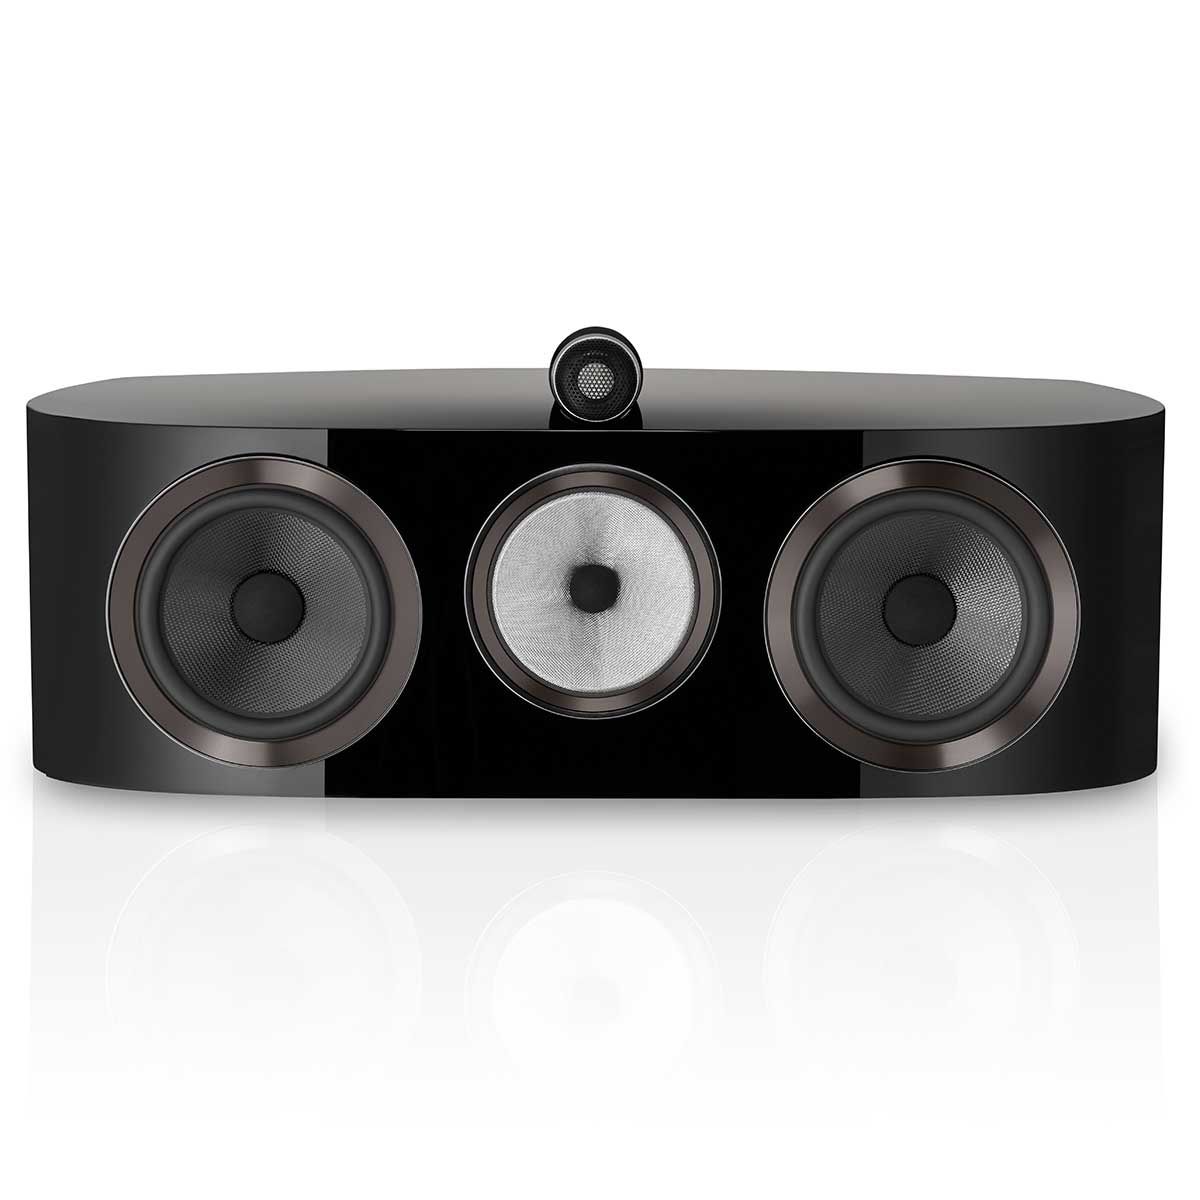 Bowers & Wilkins HTM81 D4 Center Channel Speaker, Gloss Black, front view without grille